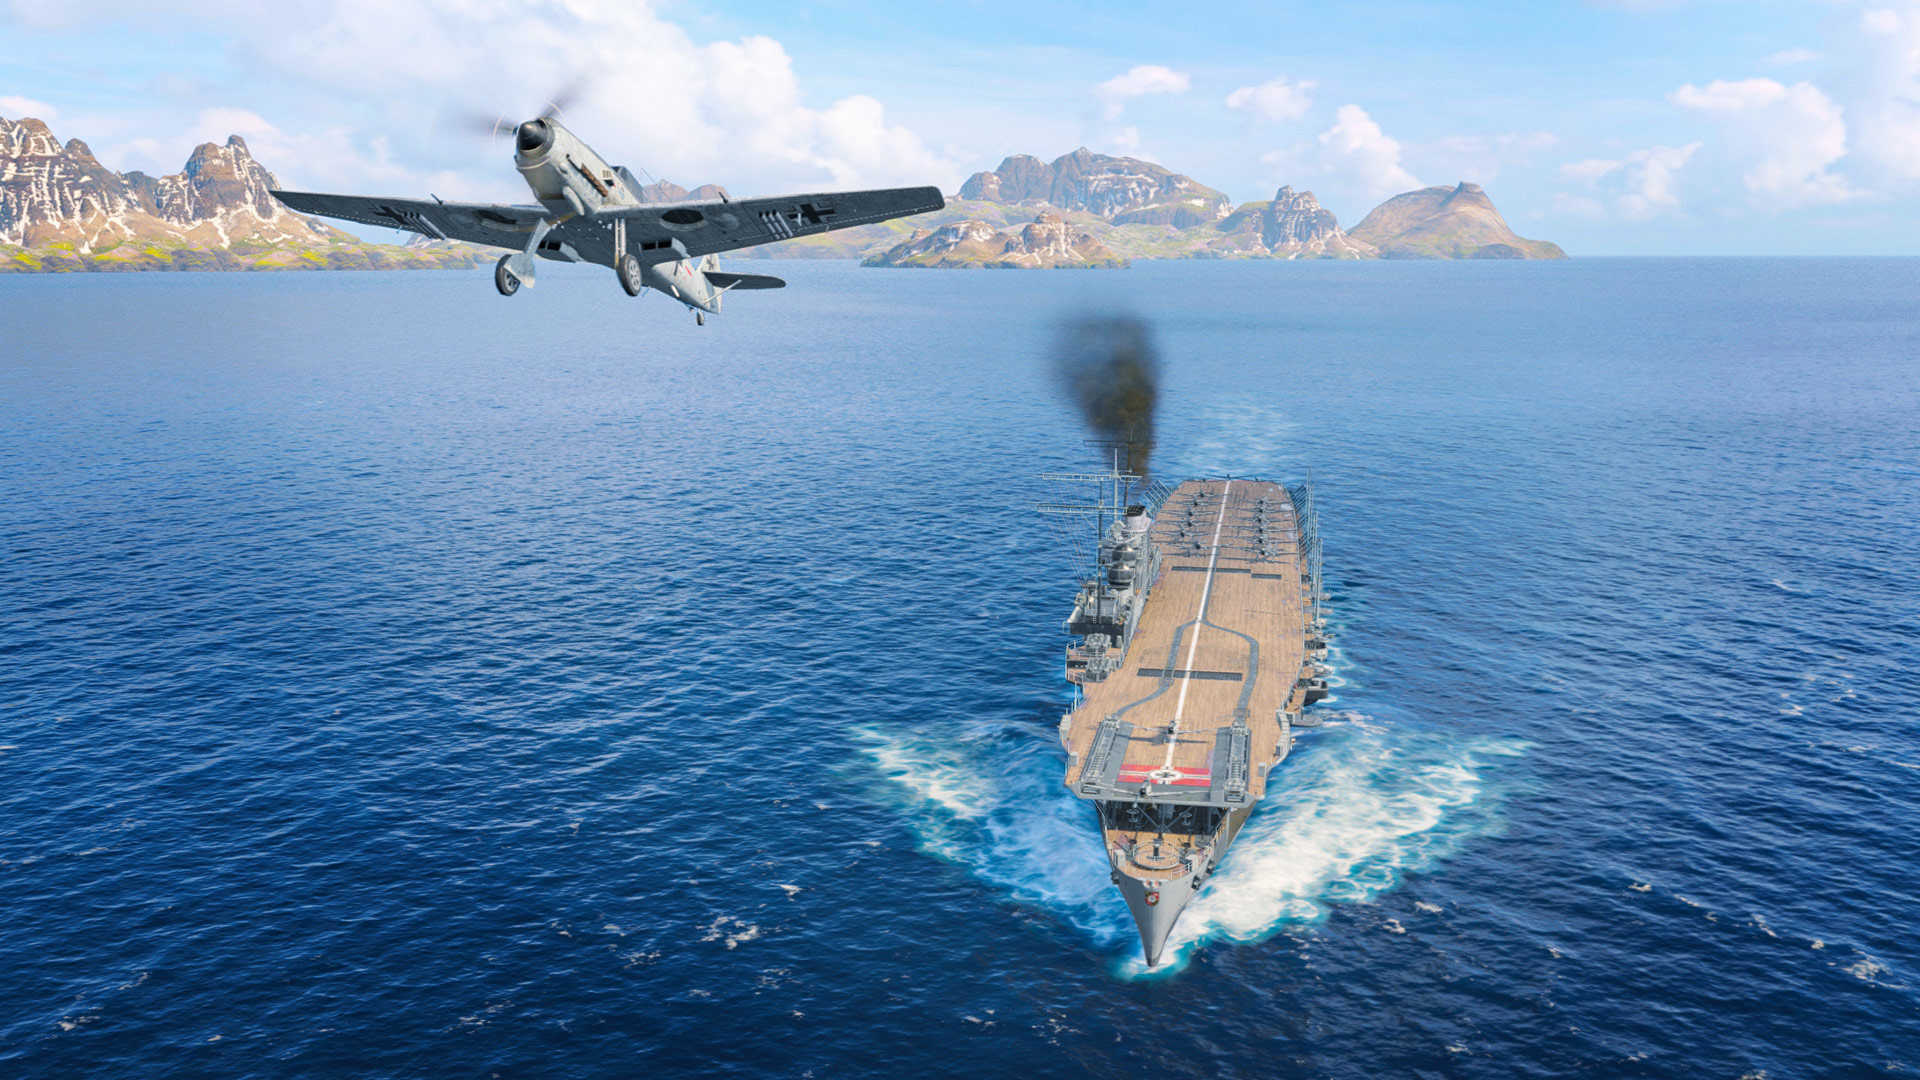 world of warships carrier rework release date